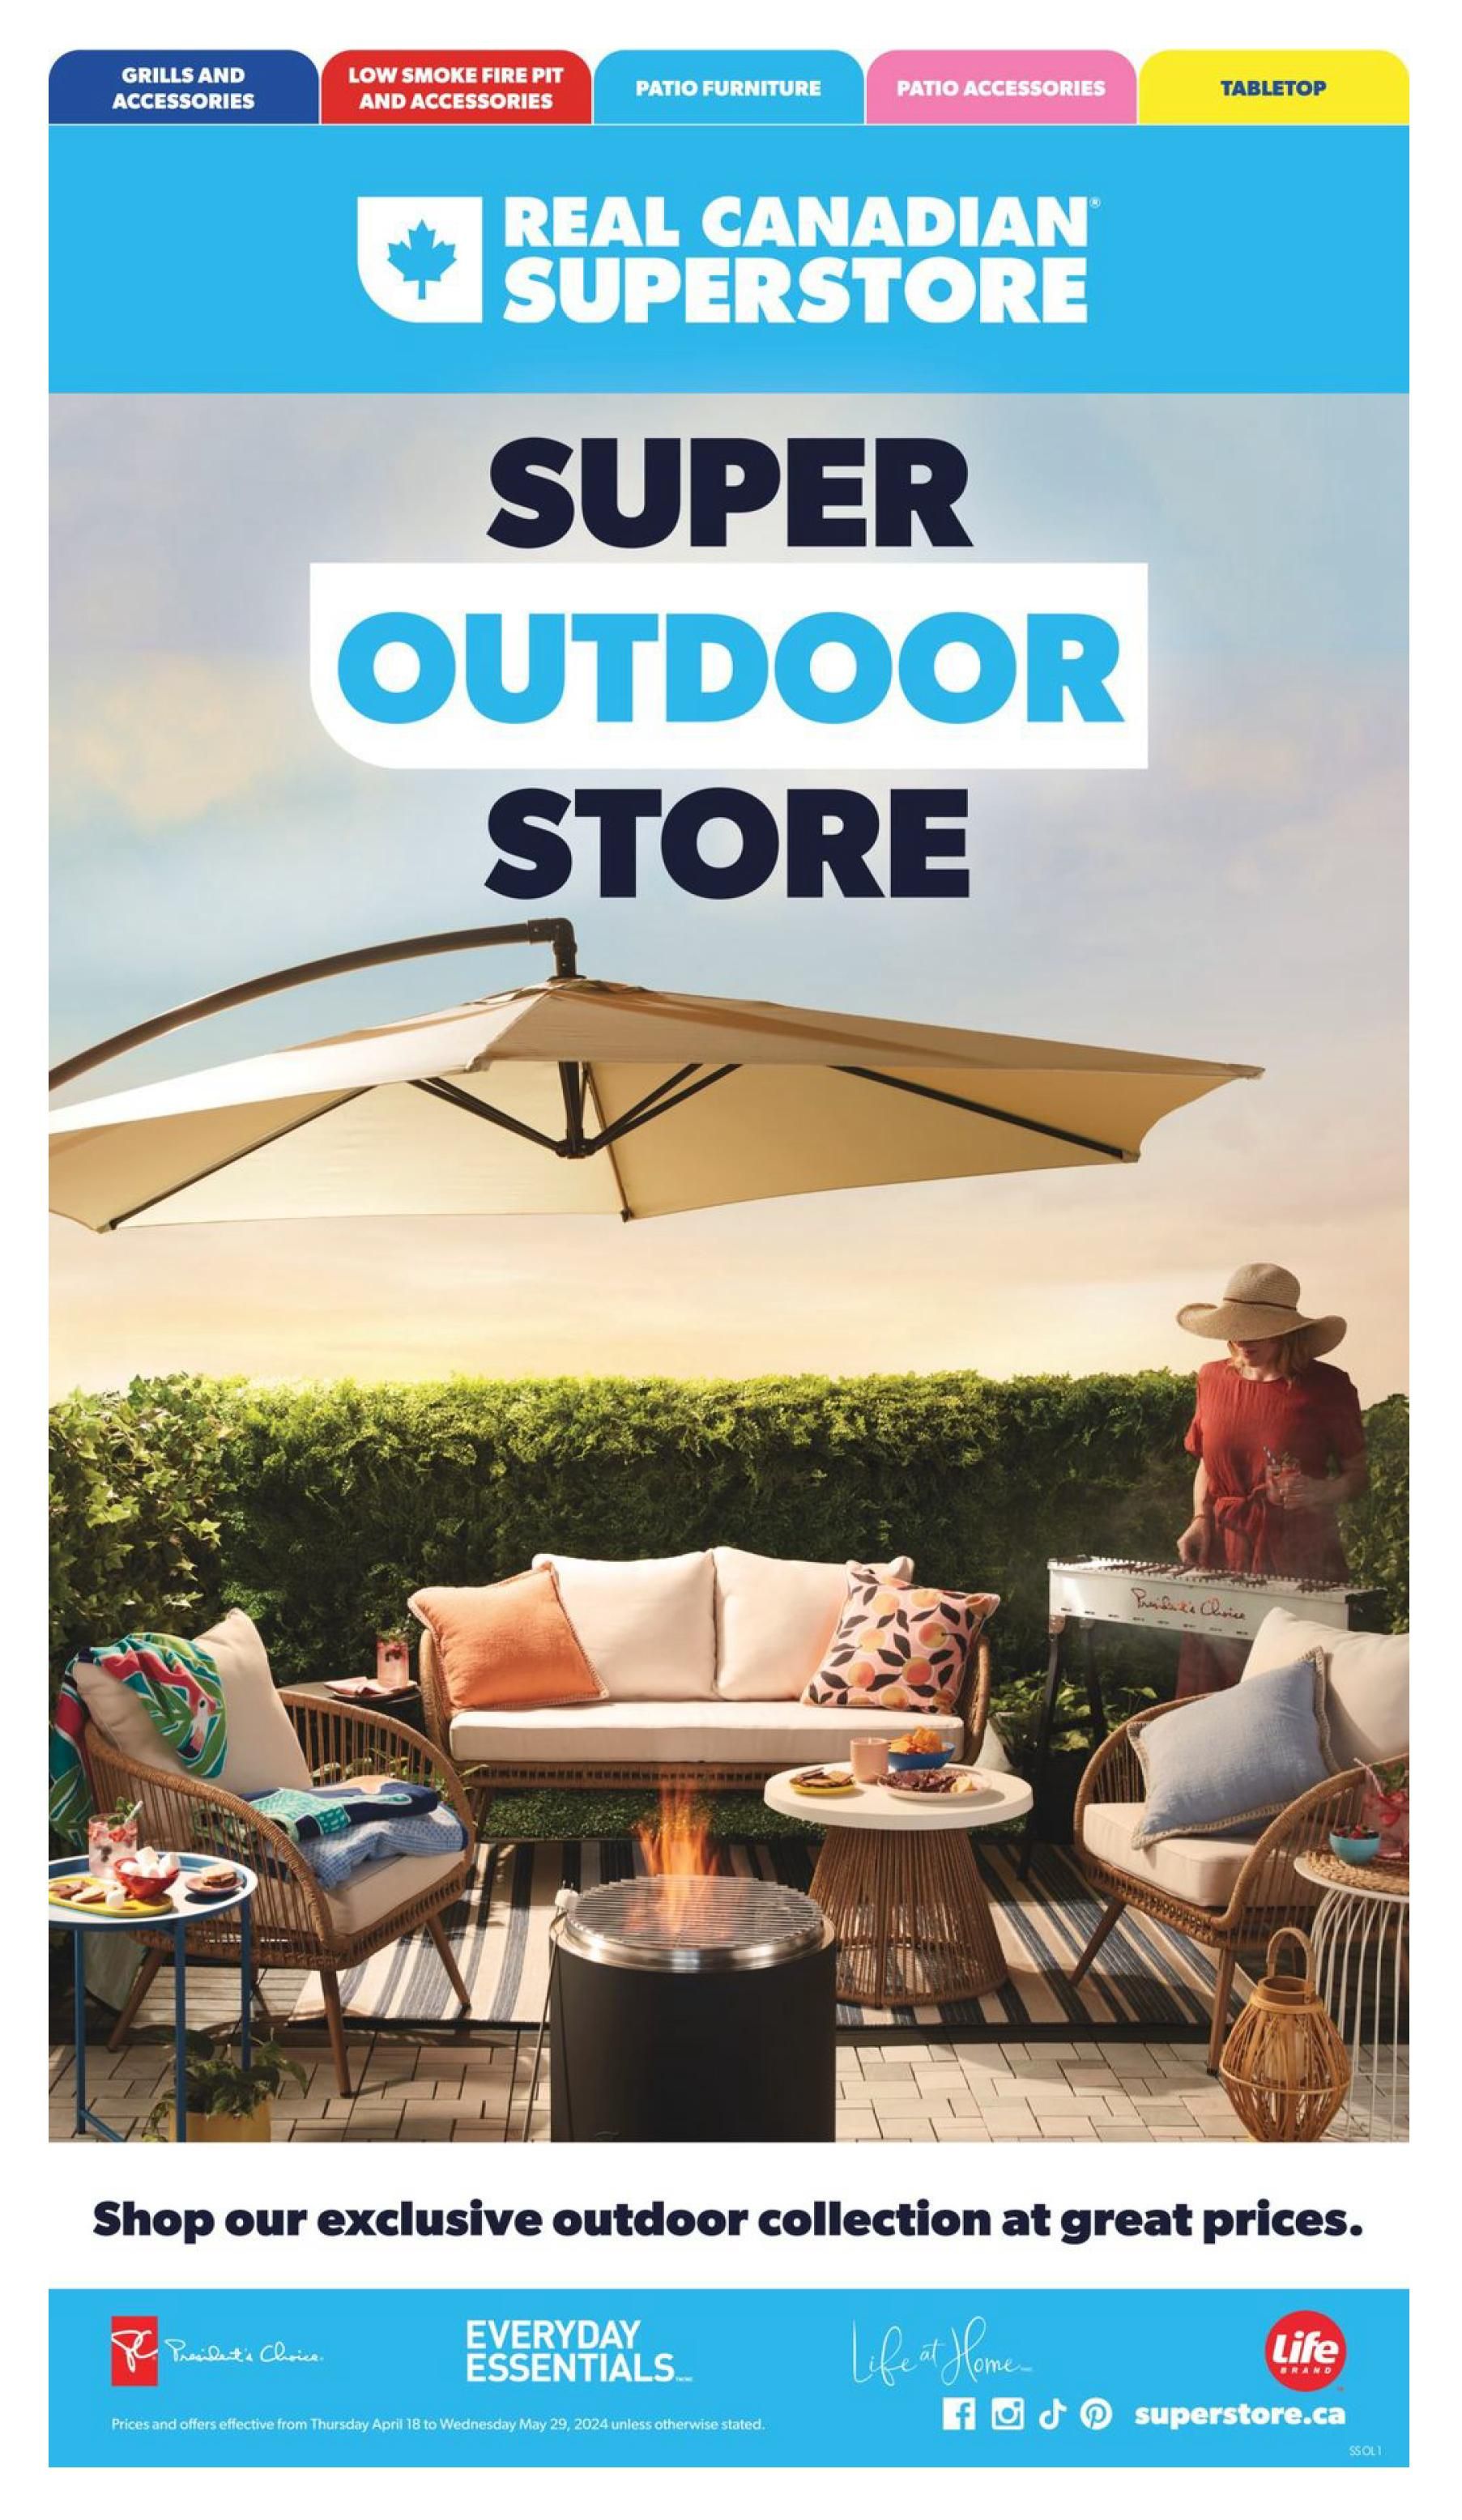 Real Canadian Superstore - Western Canada - Super Outdoor Store Specials